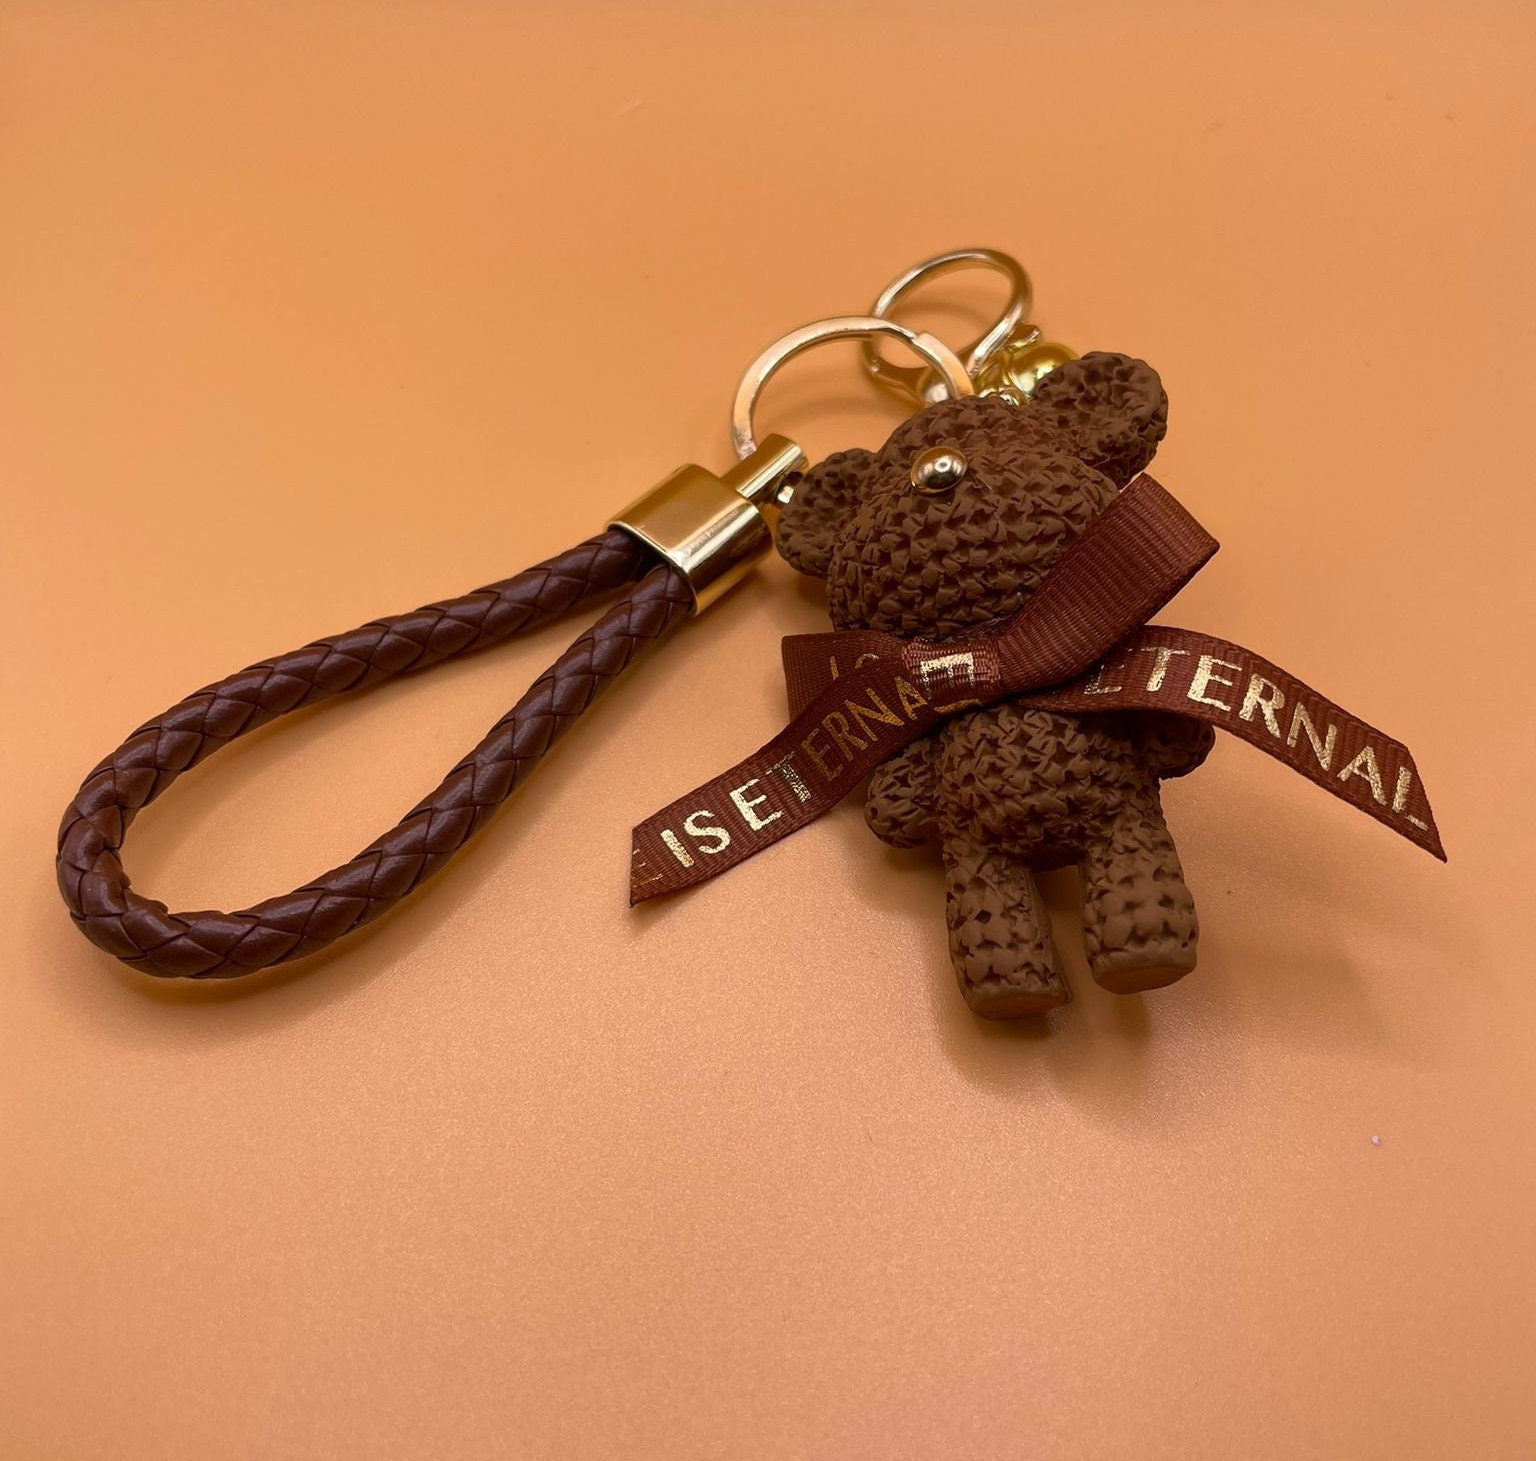 French Vogue Boutique, Accessories, Bag Charm Keychain Teddy Bear Damier  Azur Handmade With Charms Tassel